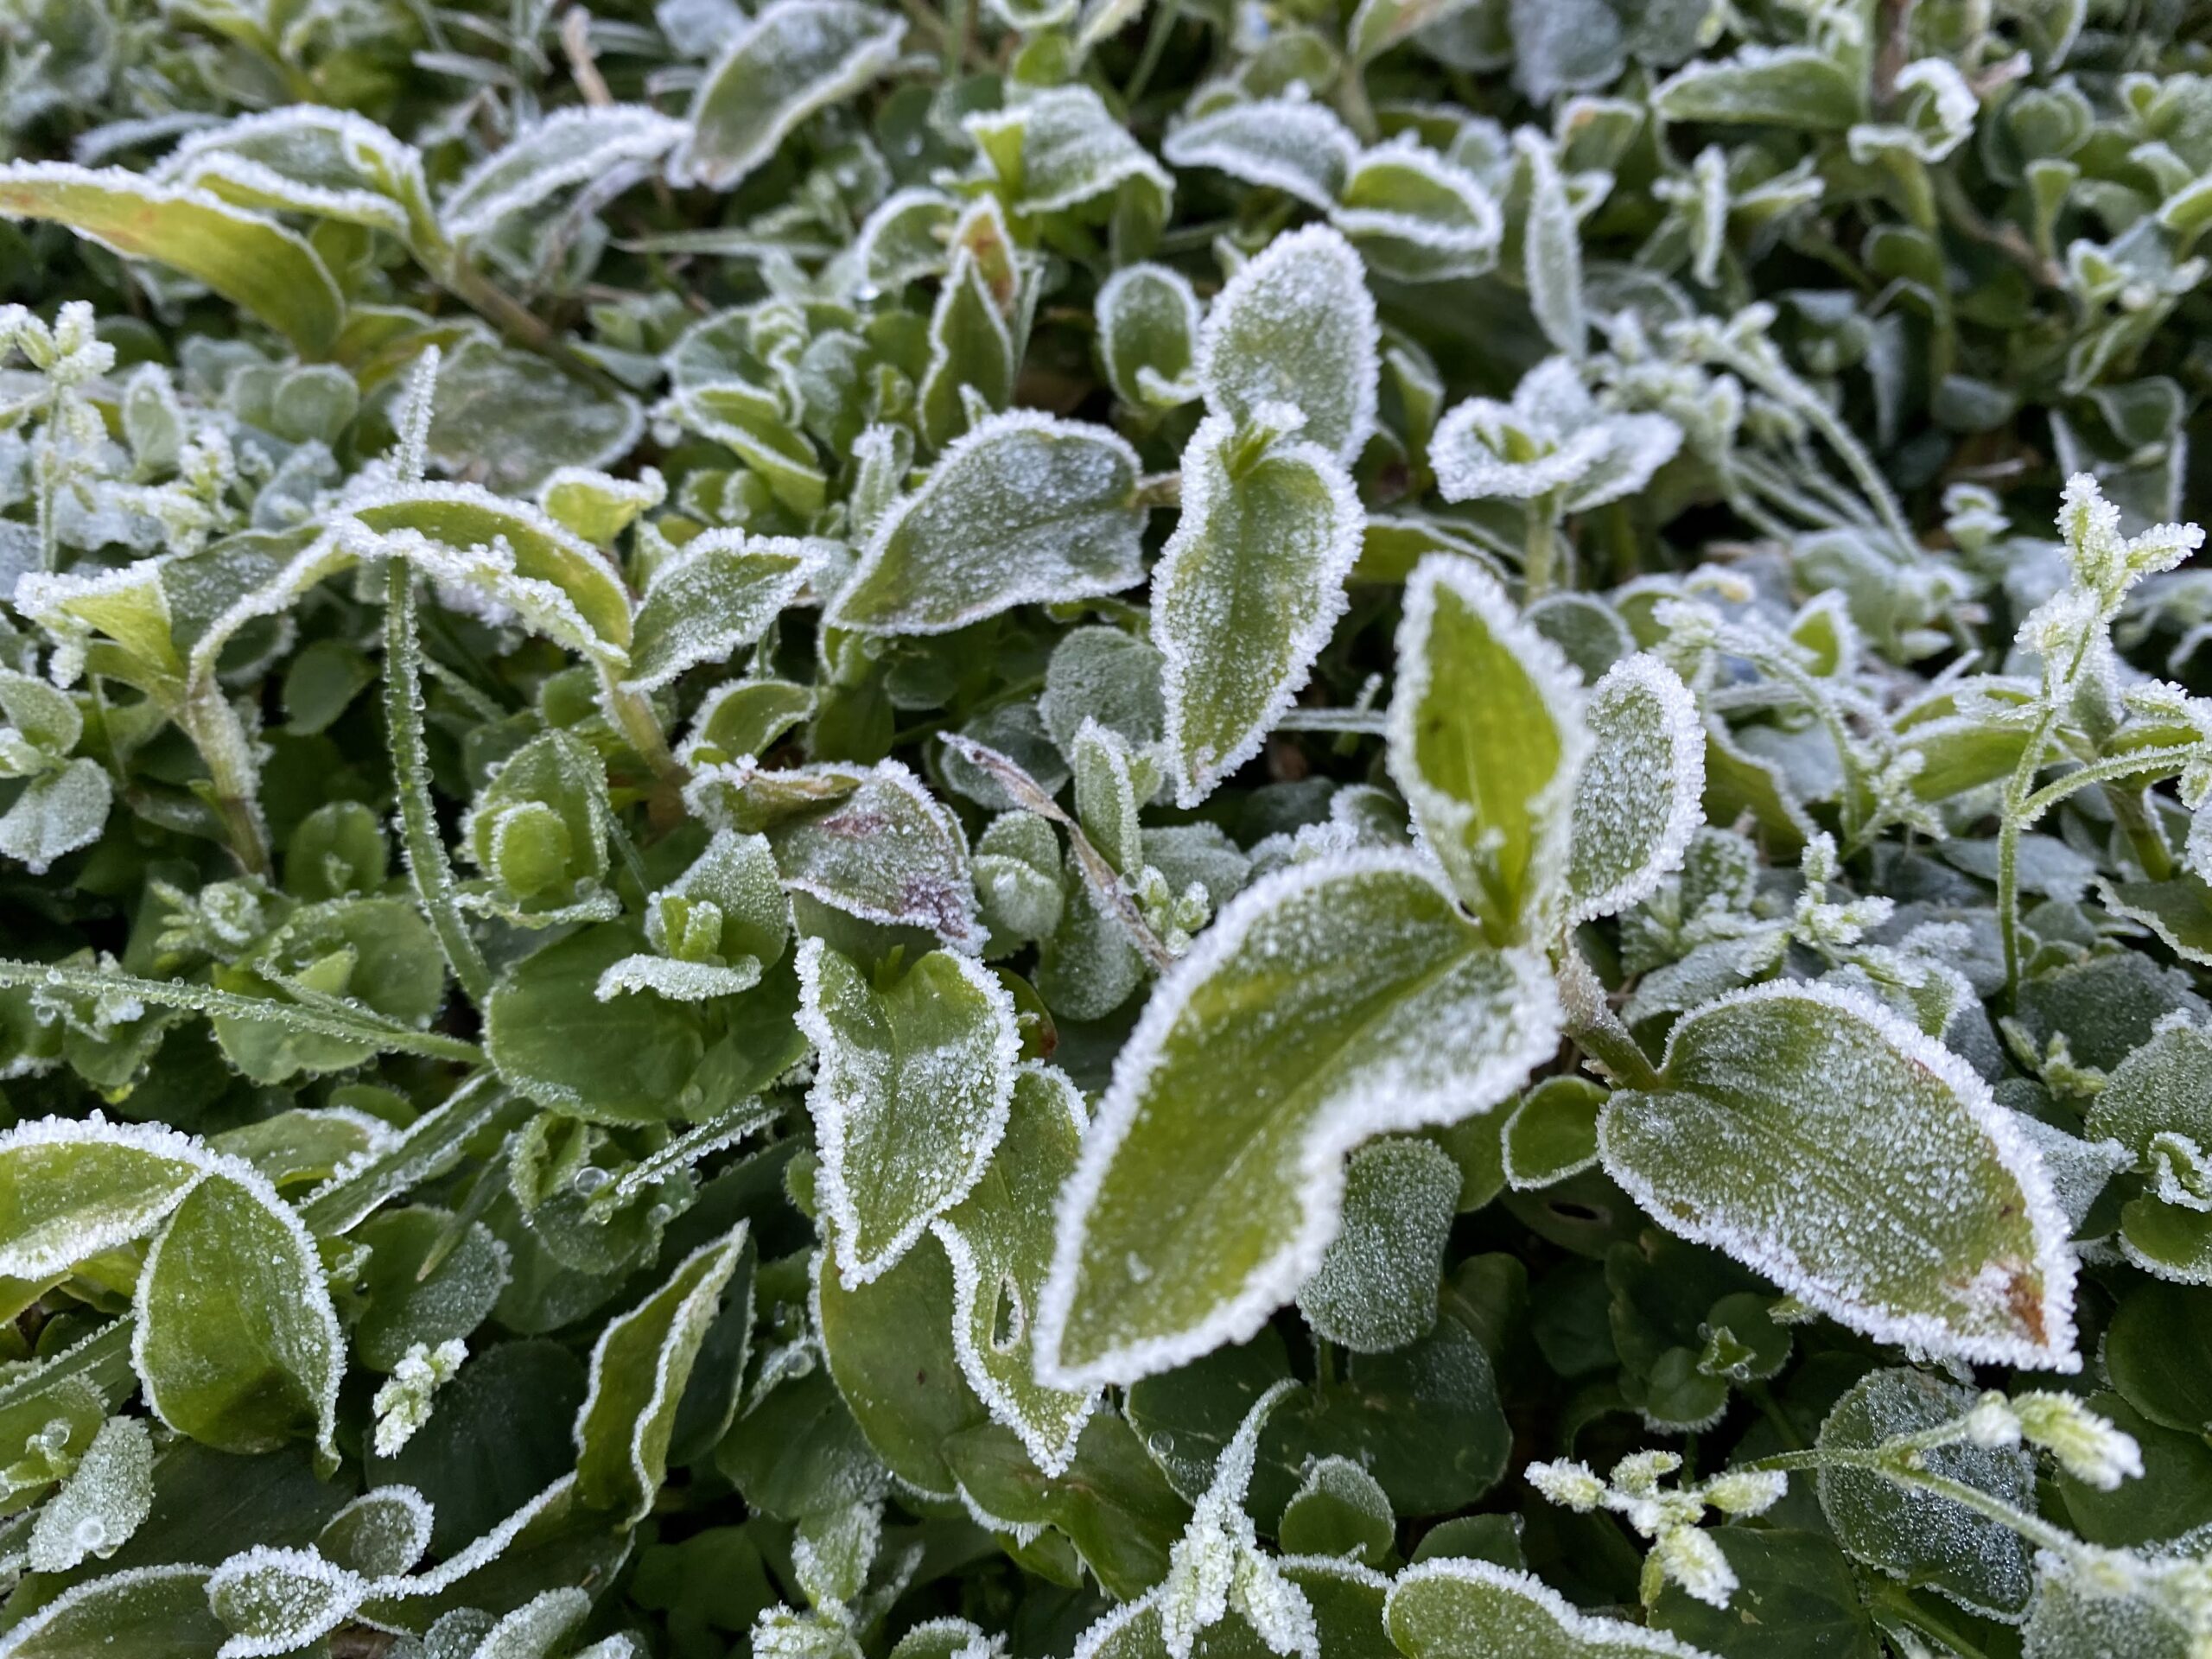 close up shot of some plants/weeds growing in a yard. they are green leafy things but they are covered in frost because it was frozen even in FLorida